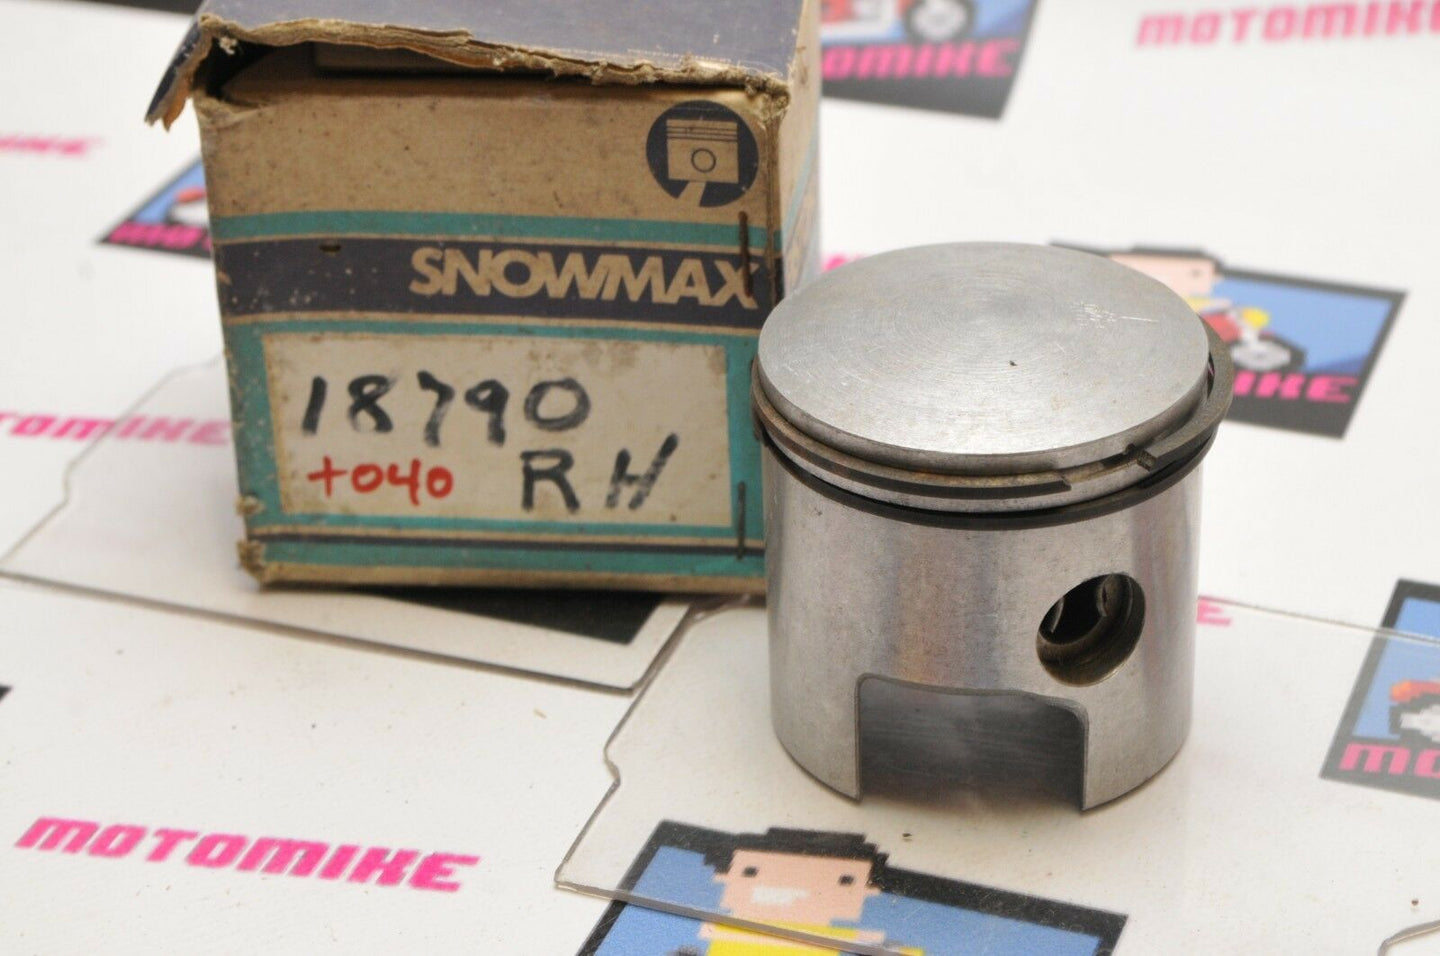 NOS New Old Stock SNOWMAX PISTON 18790 +40 ROTAX RH R RIGHT 64.5mm +.040 OVER